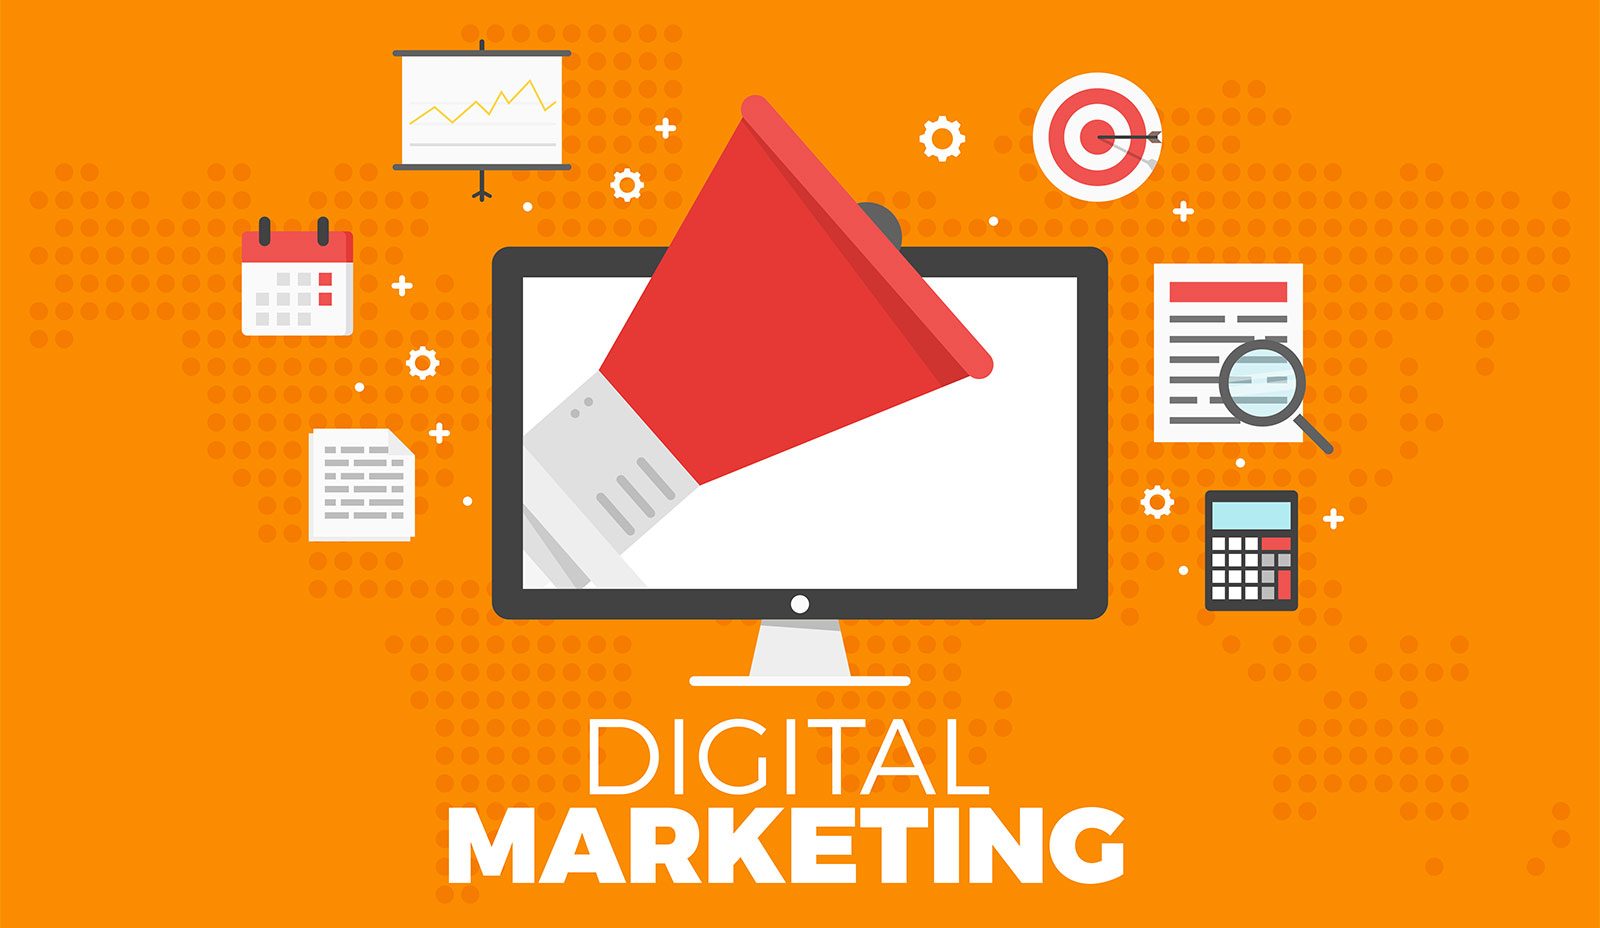 What Should You Consider Before Hiring Digital Marketing Companies In London?